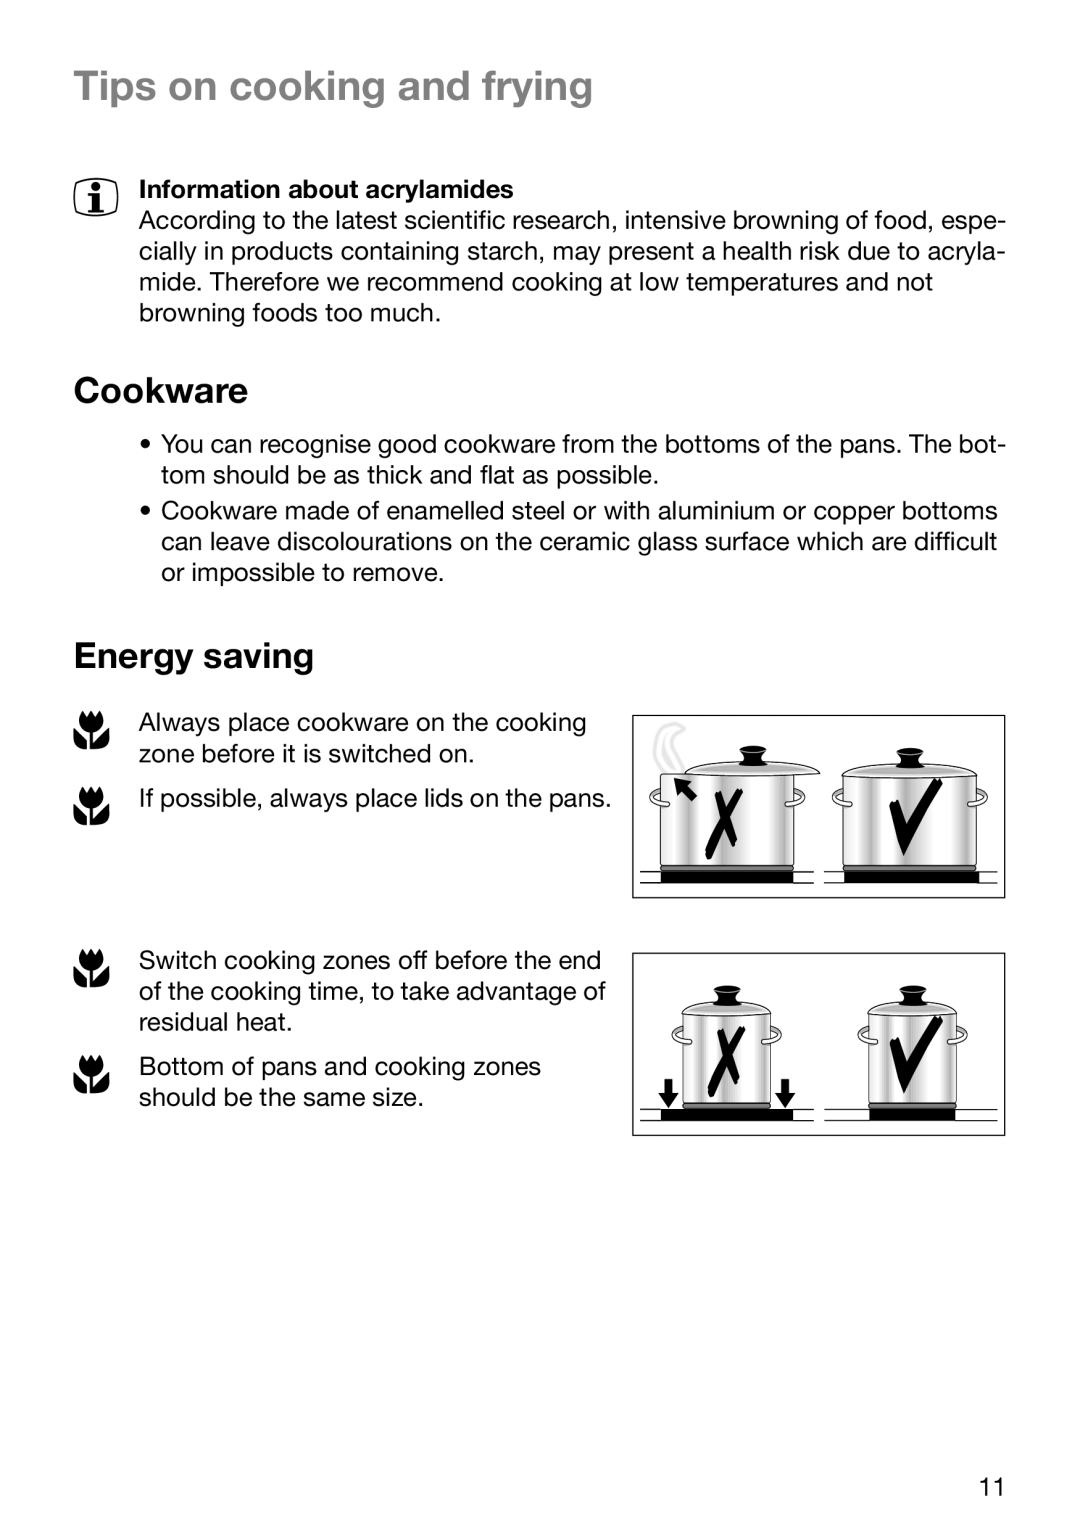 Electrolux TBC 651 X installation instructions Tips on cooking and frying, Cookware, Energy saving 